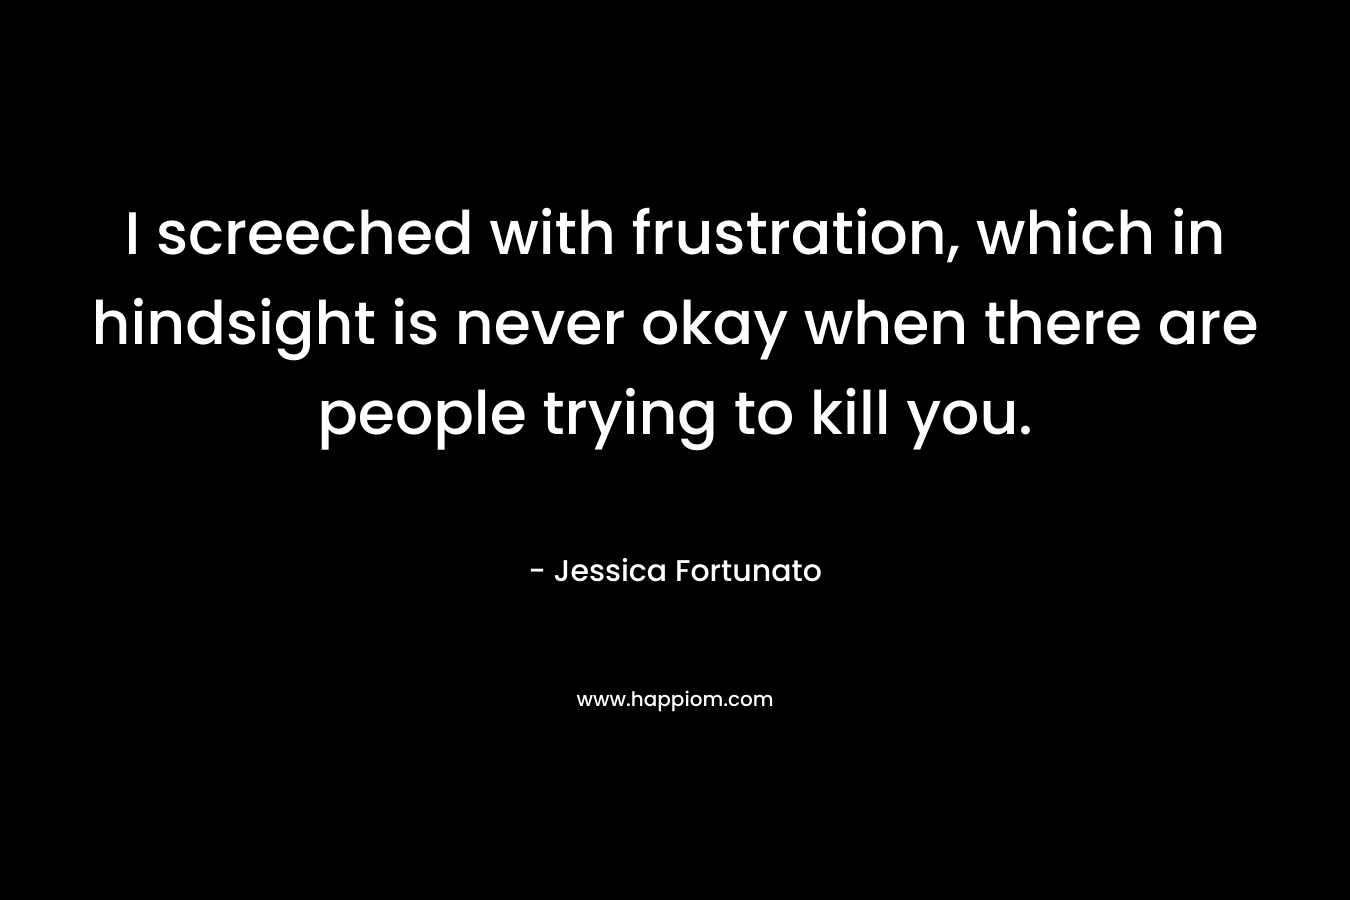 I screeched with frustration, which in hindsight is never okay when there are people trying to kill you. – Jessica Fortunato